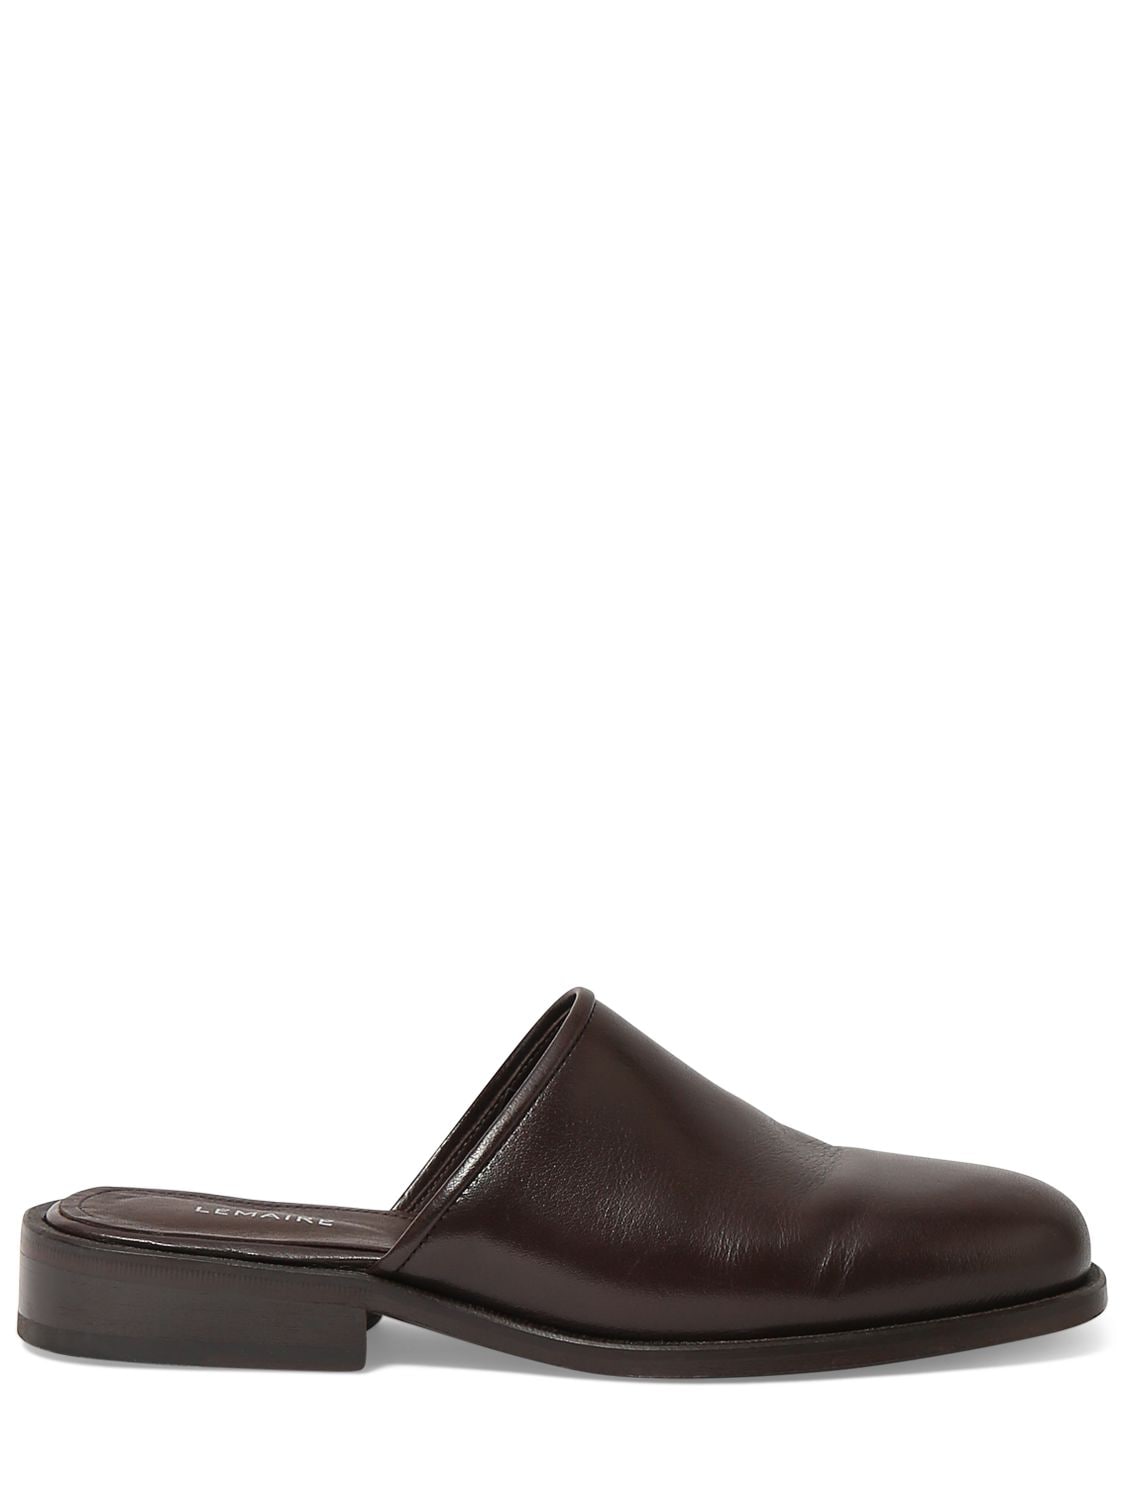 Lemaire Square Leather Mules In Dark Brown